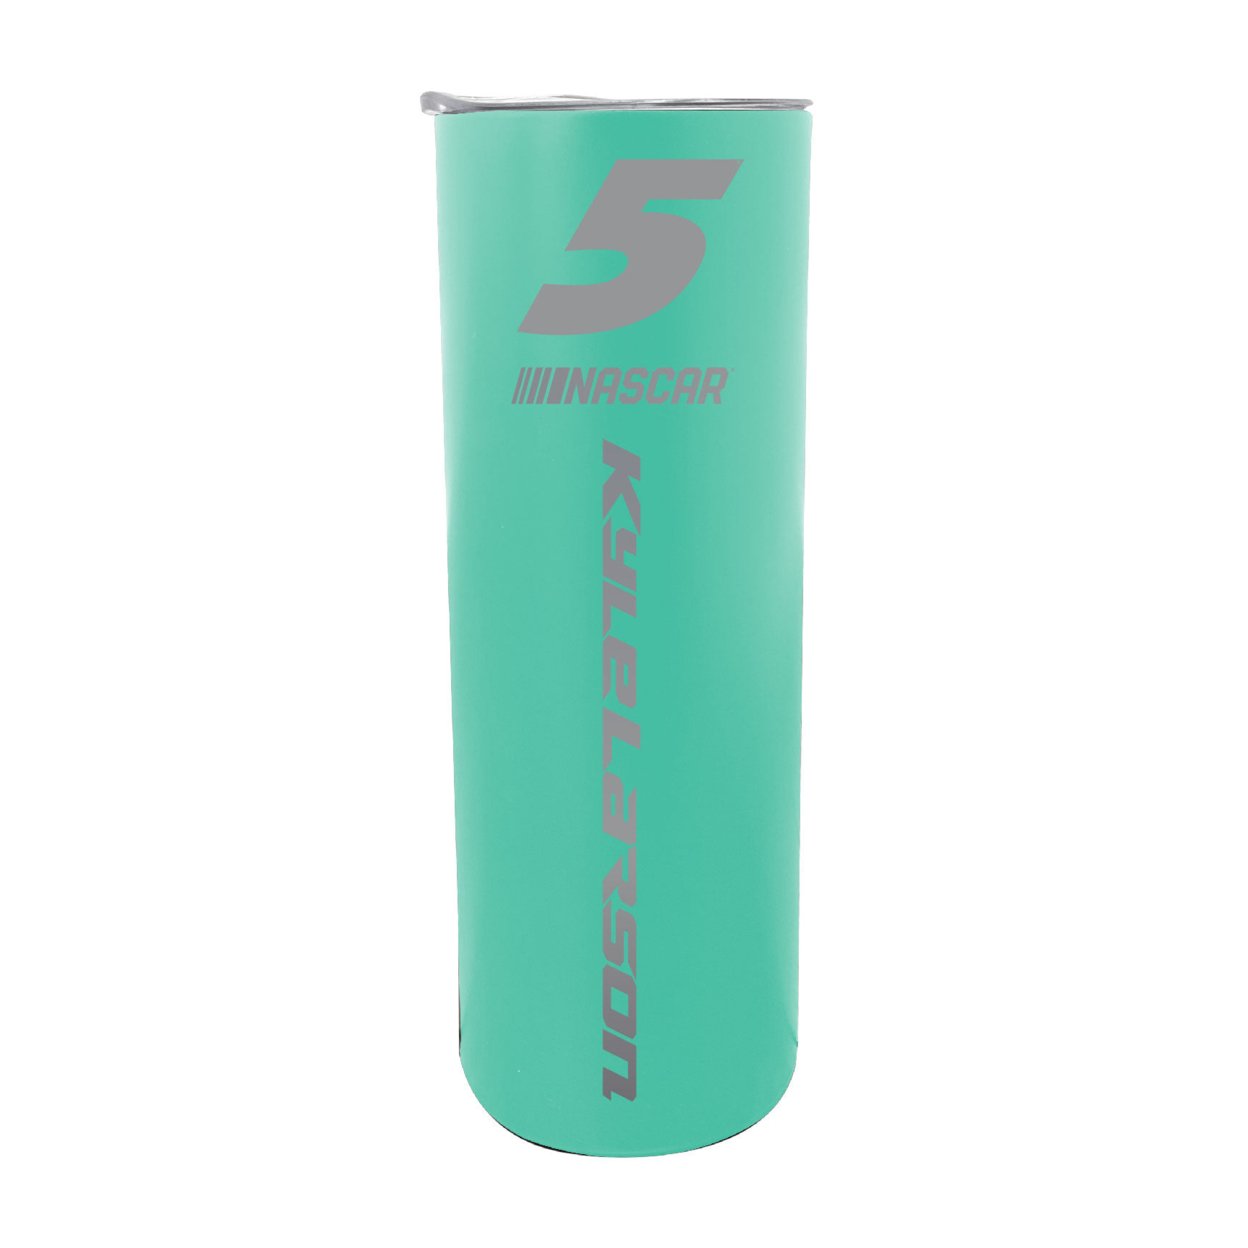 #5 Kyle Larson Officially Licensed 20oz Insulated Stainless Steel Skinny Tumbler - Seafoam